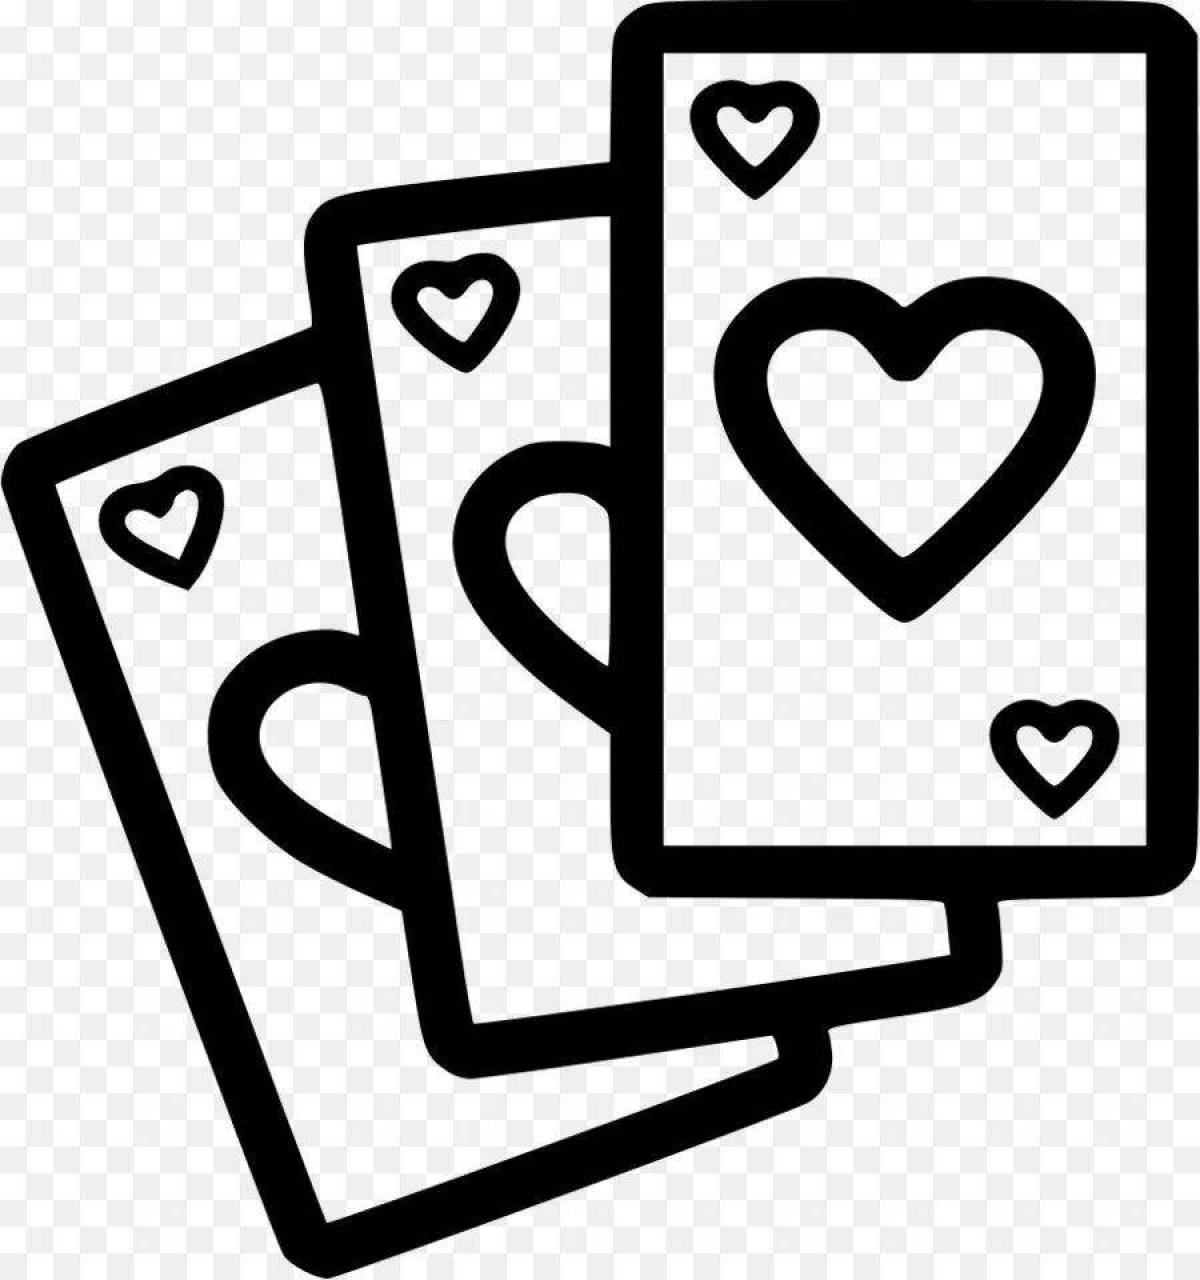 Charming uno card with hearts